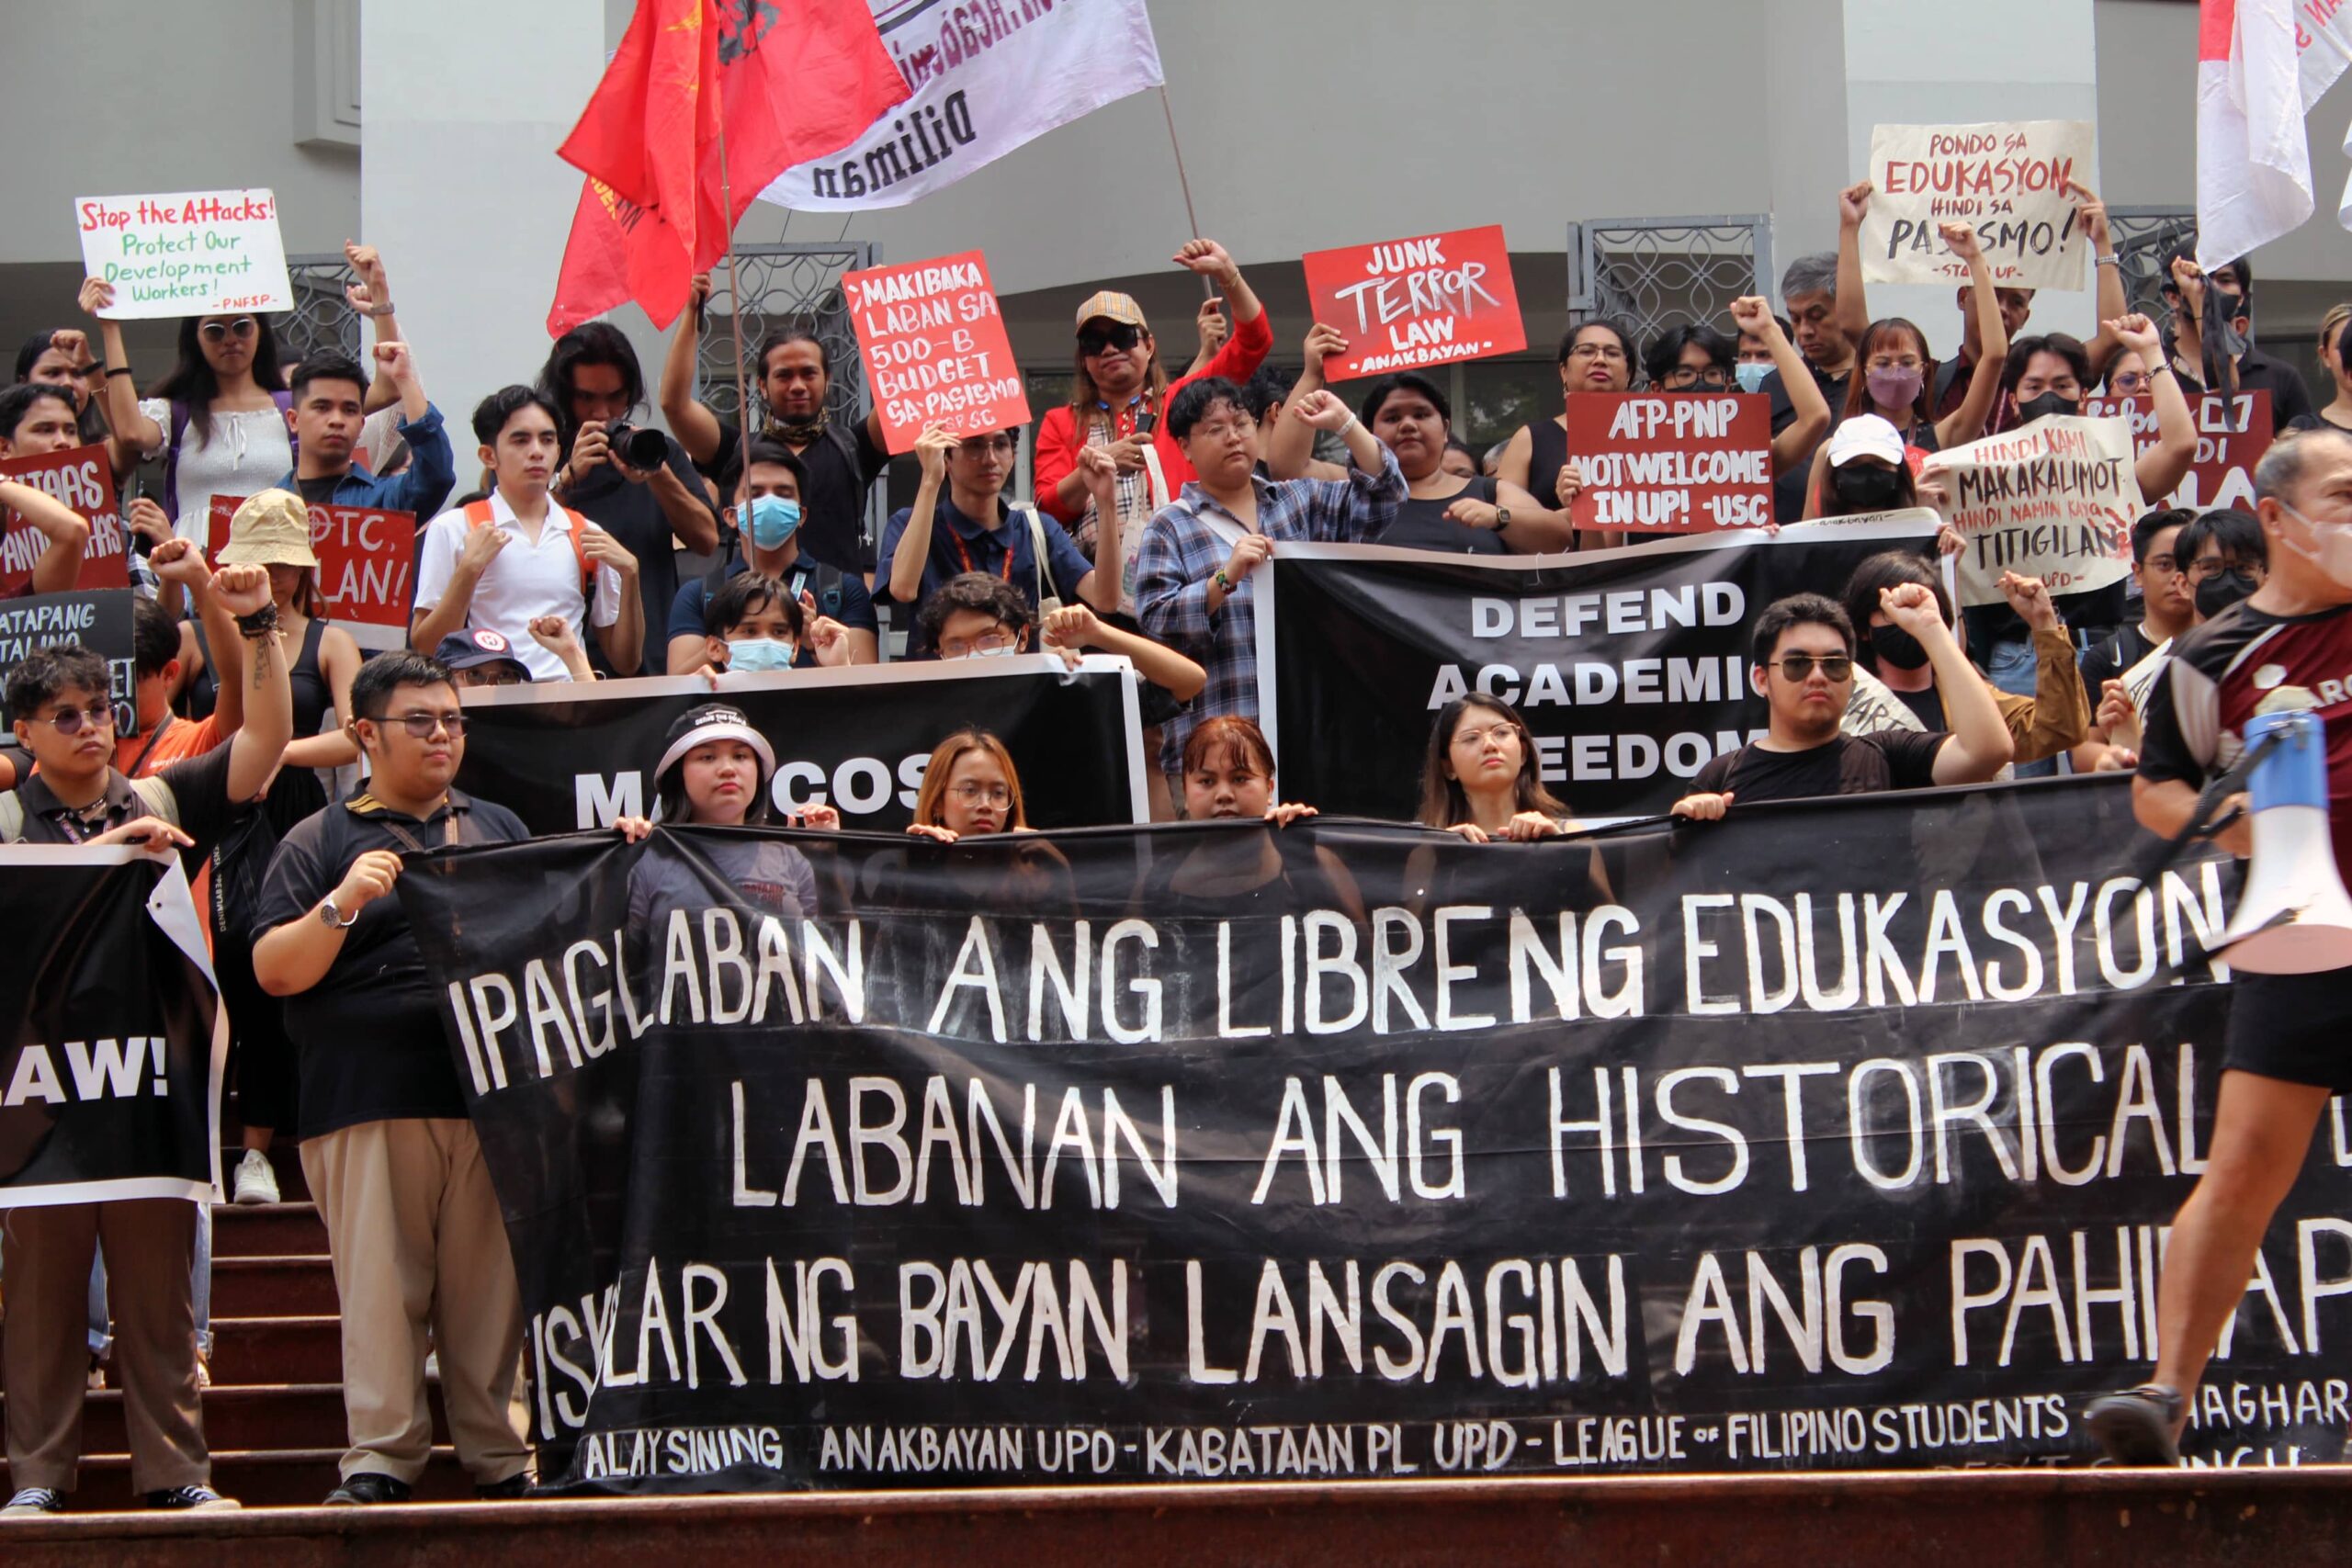 UP Diliman commemorates Martial Law with protest